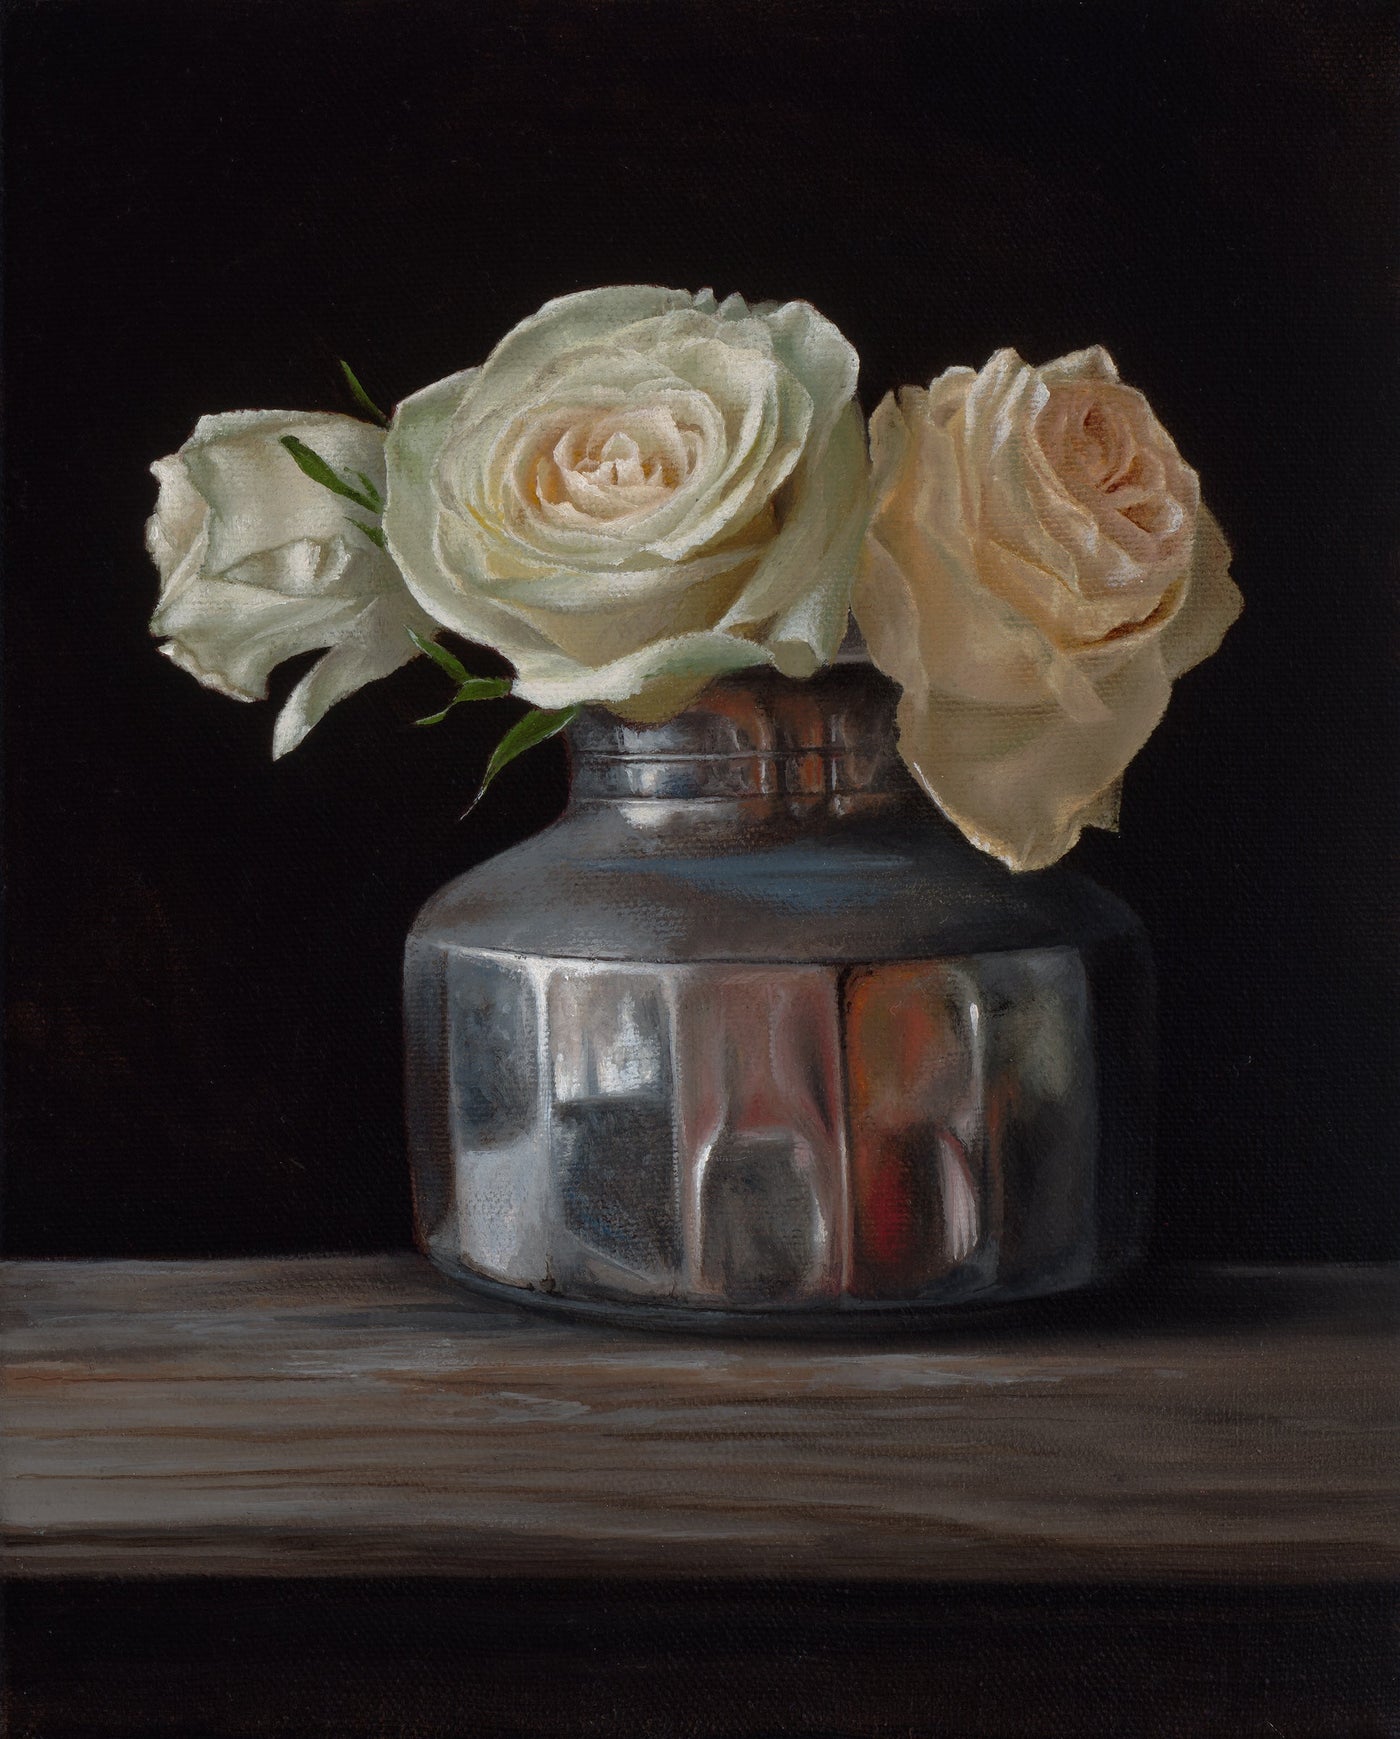 Marnie White - Roses in Silver